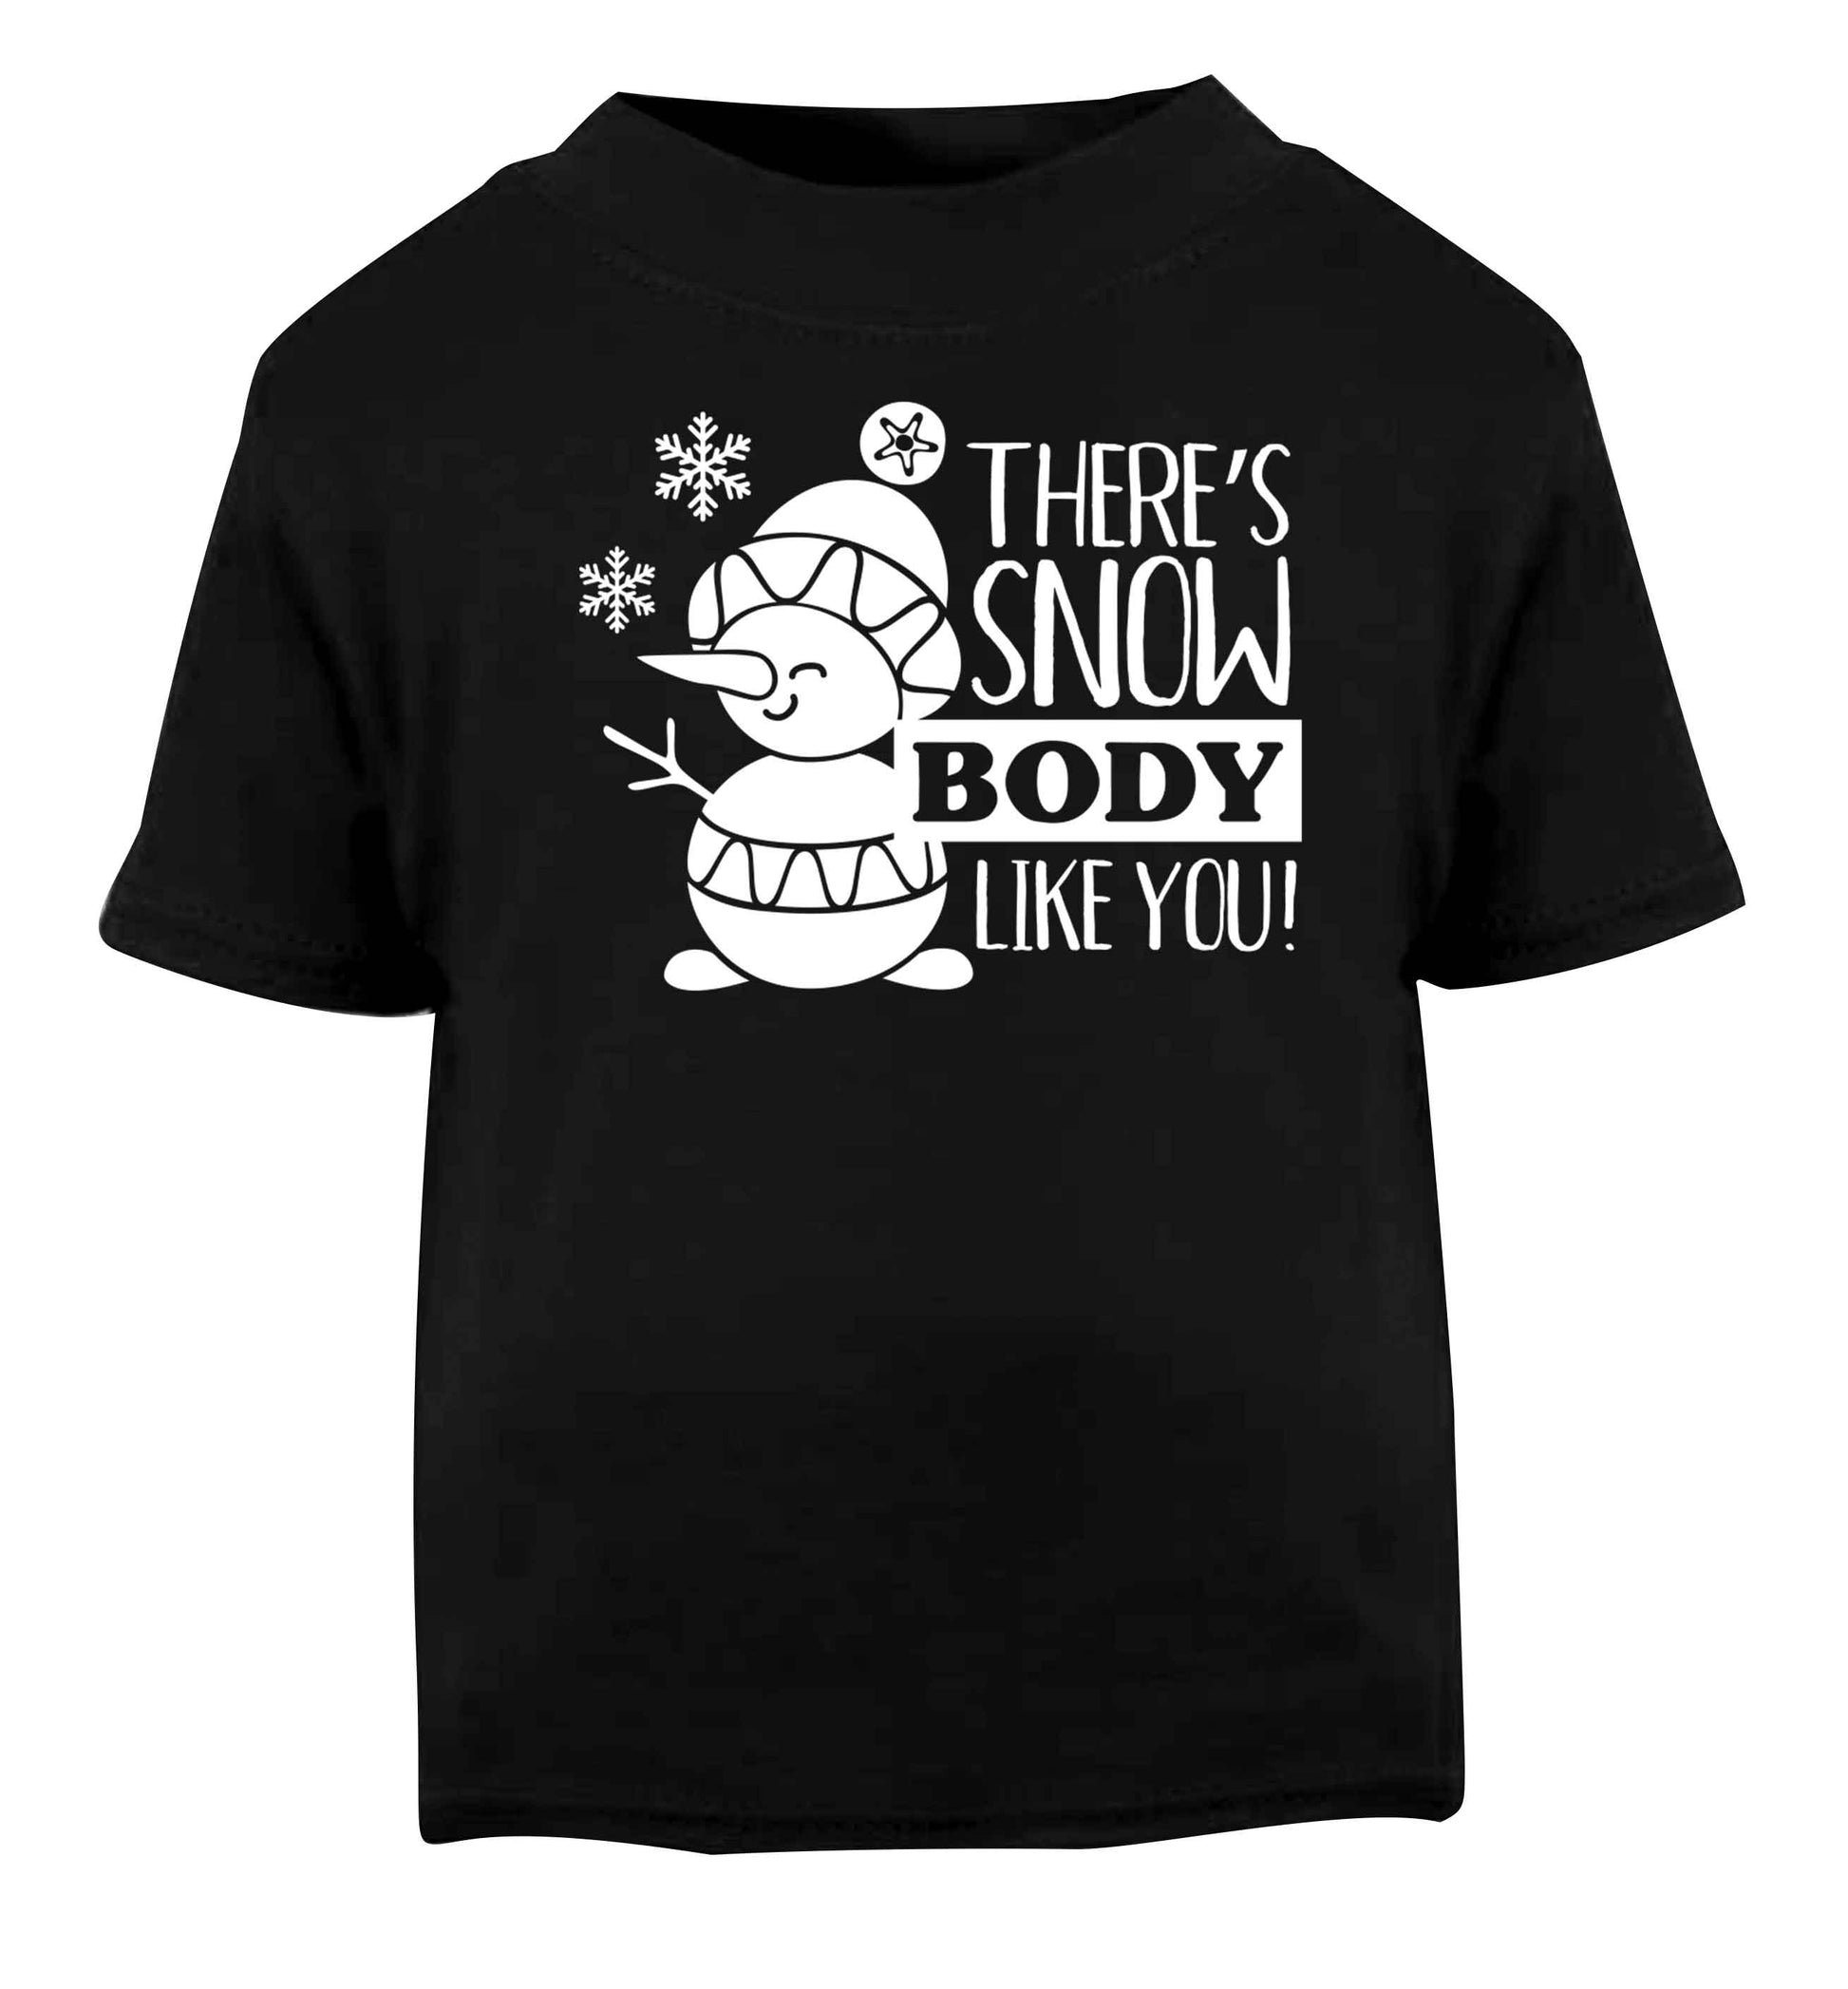 There's snow body like you Black baby toddler Tshirt 2 years